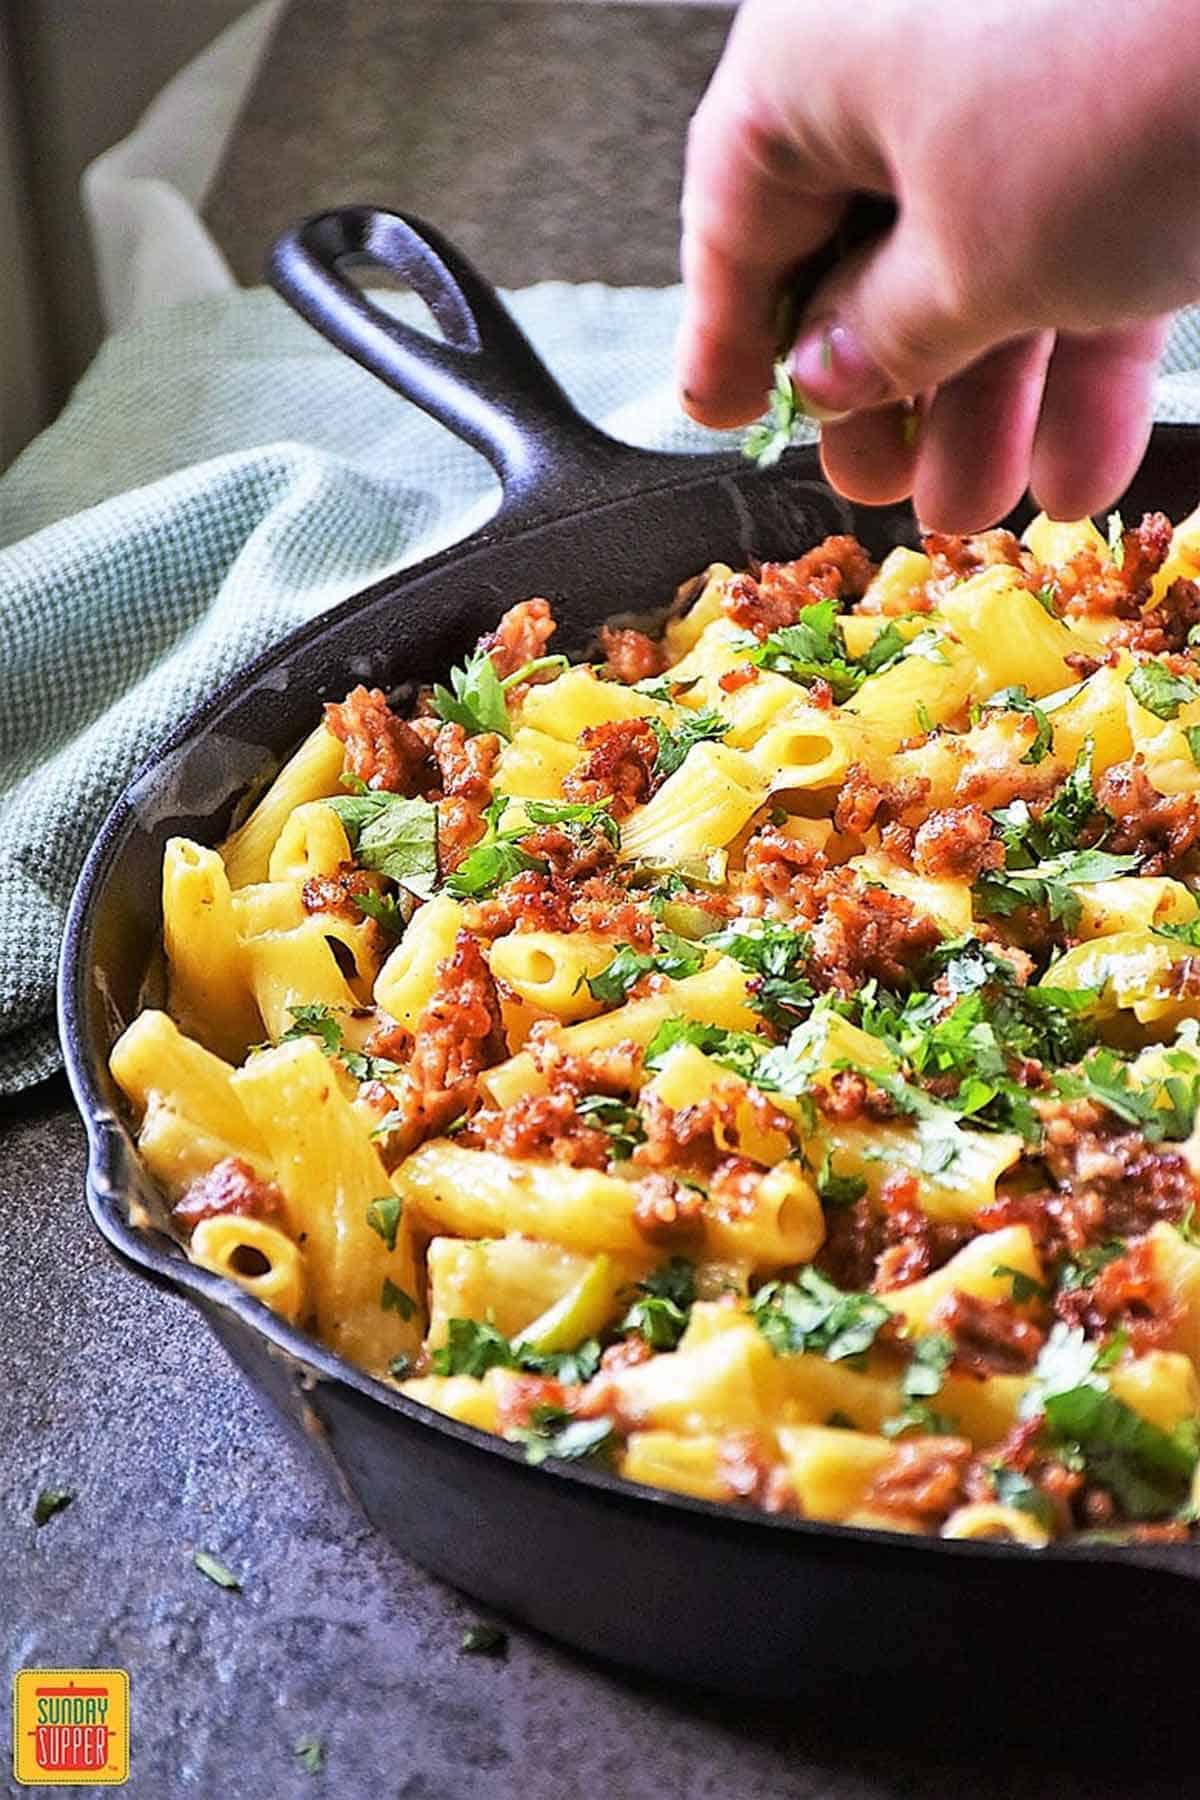 Baked ziti with sausage and peppers in a black cast iron skillet